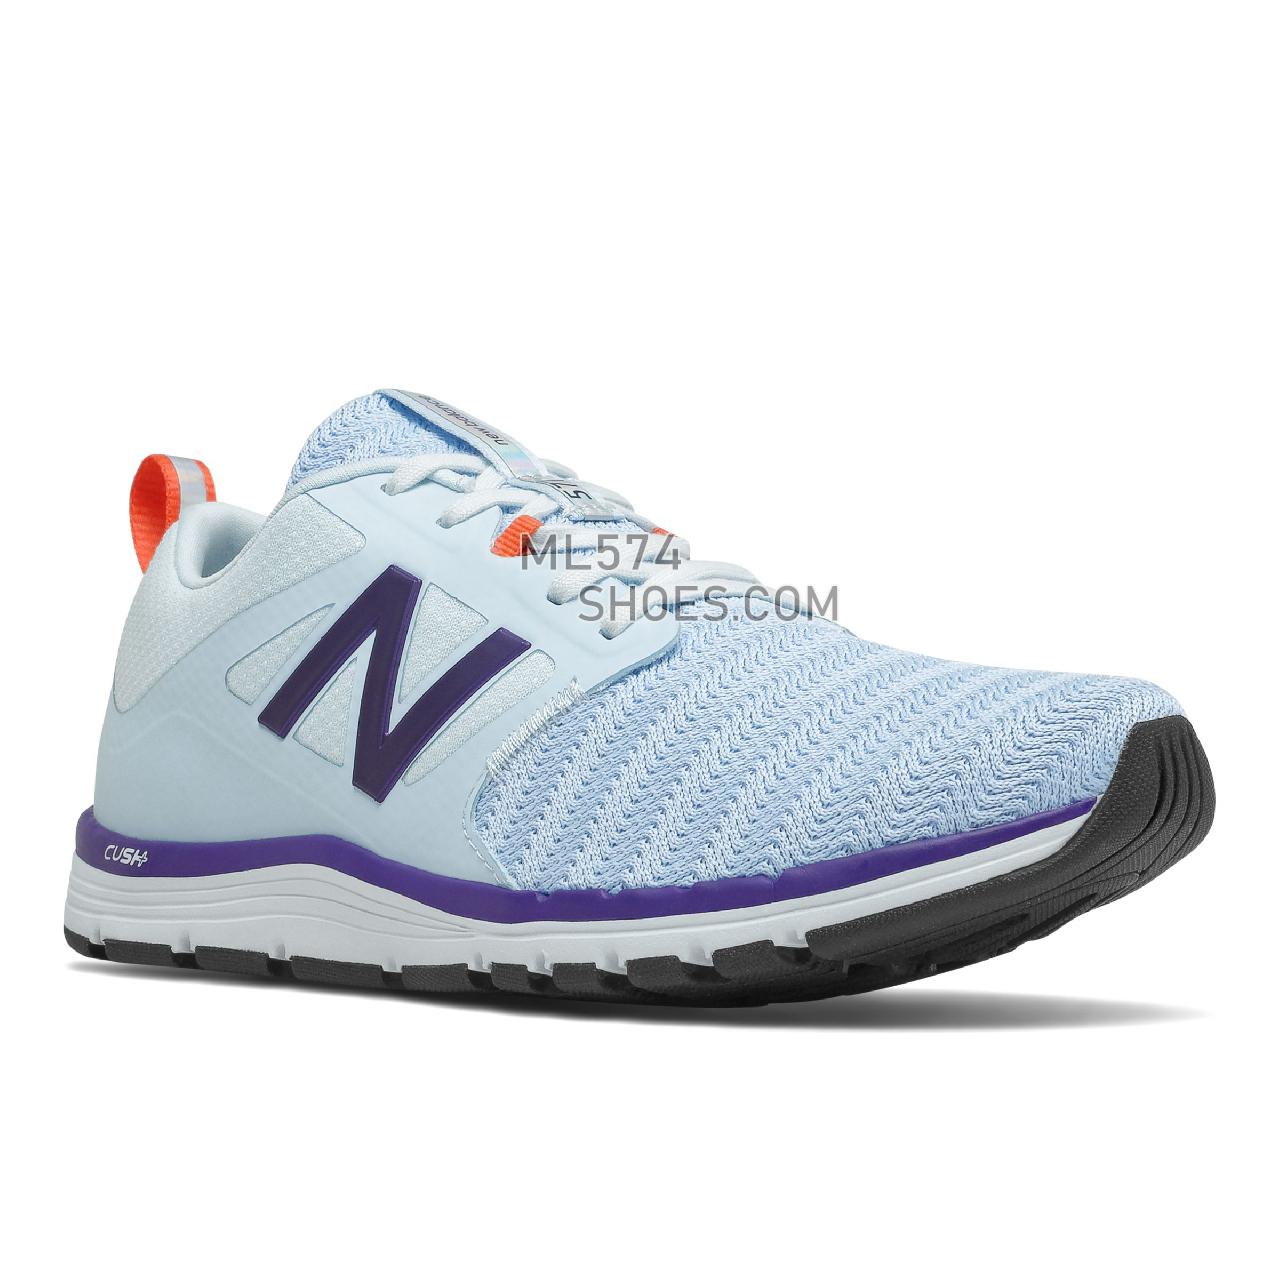 New Balance 577v5 - Women's Workout - Uv Glo with Virtual Violet - WX577US5